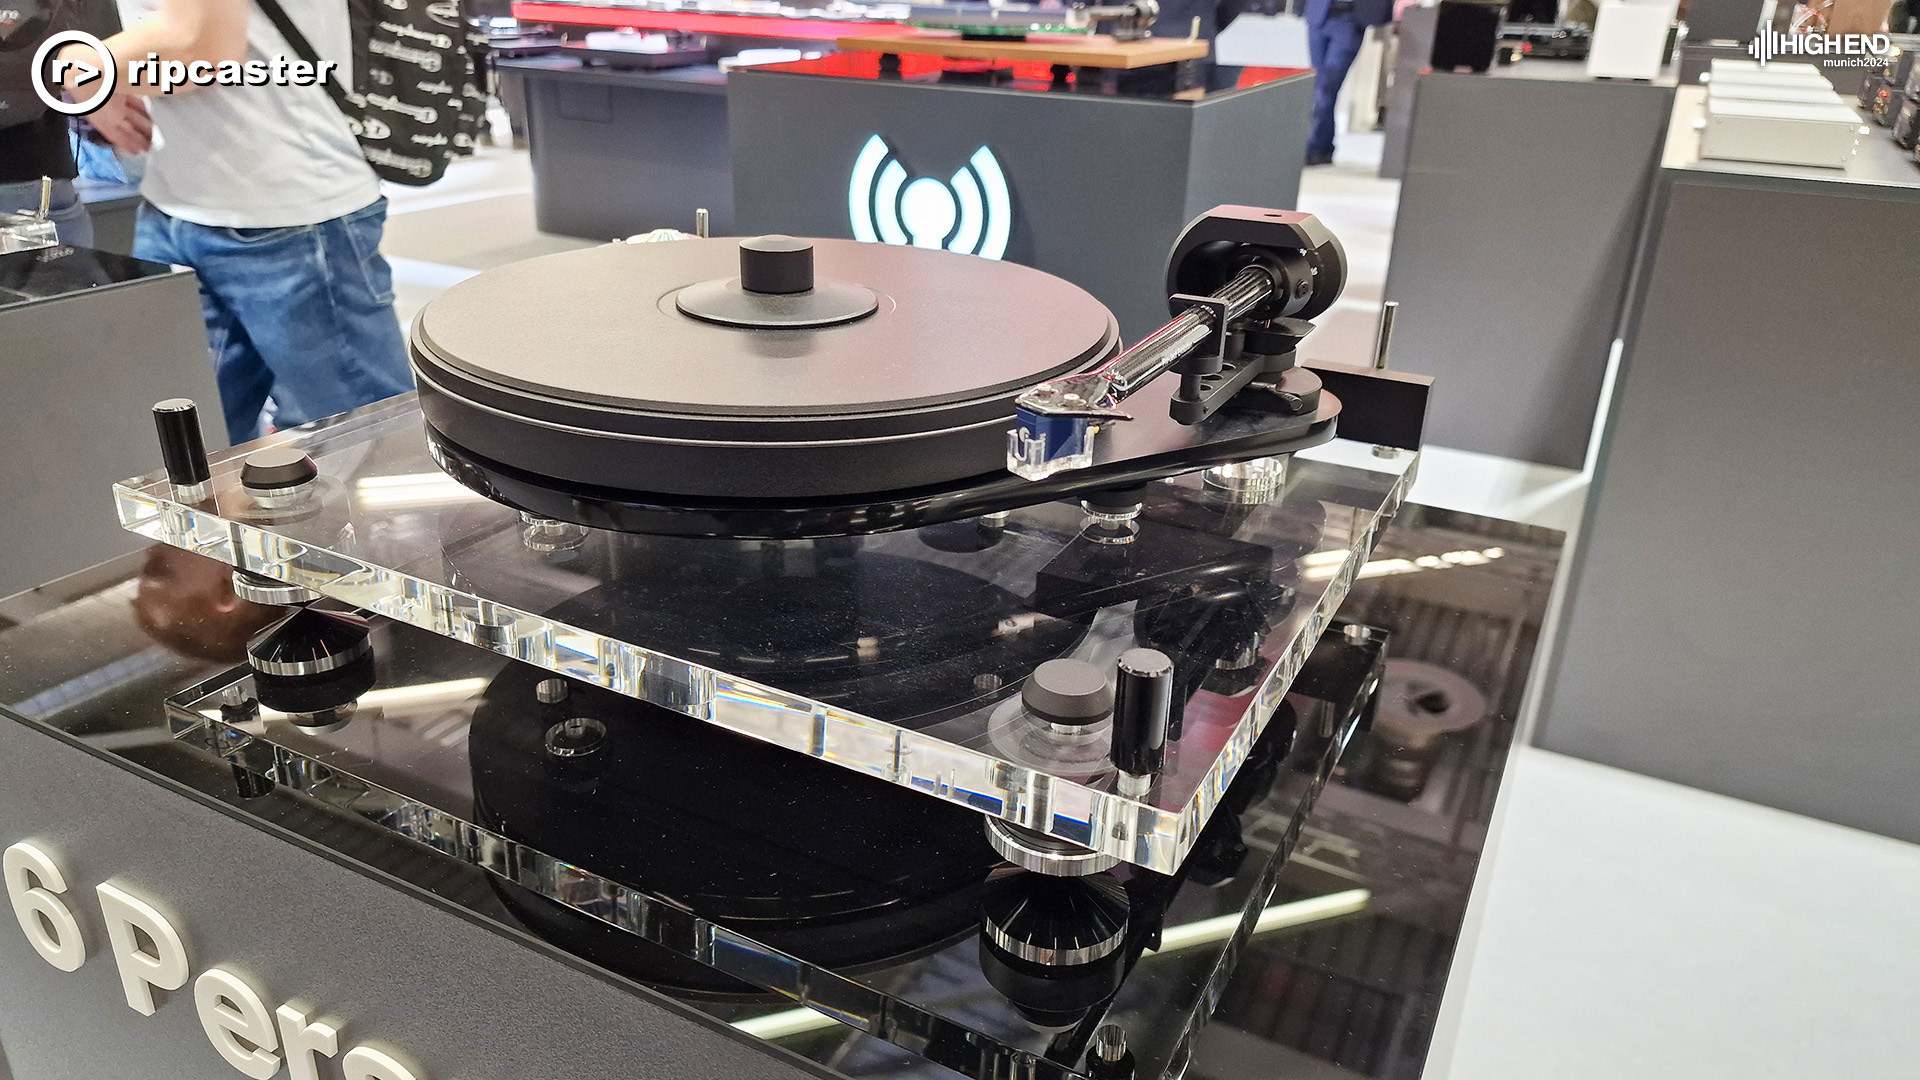 A Project turntable on a black stand 